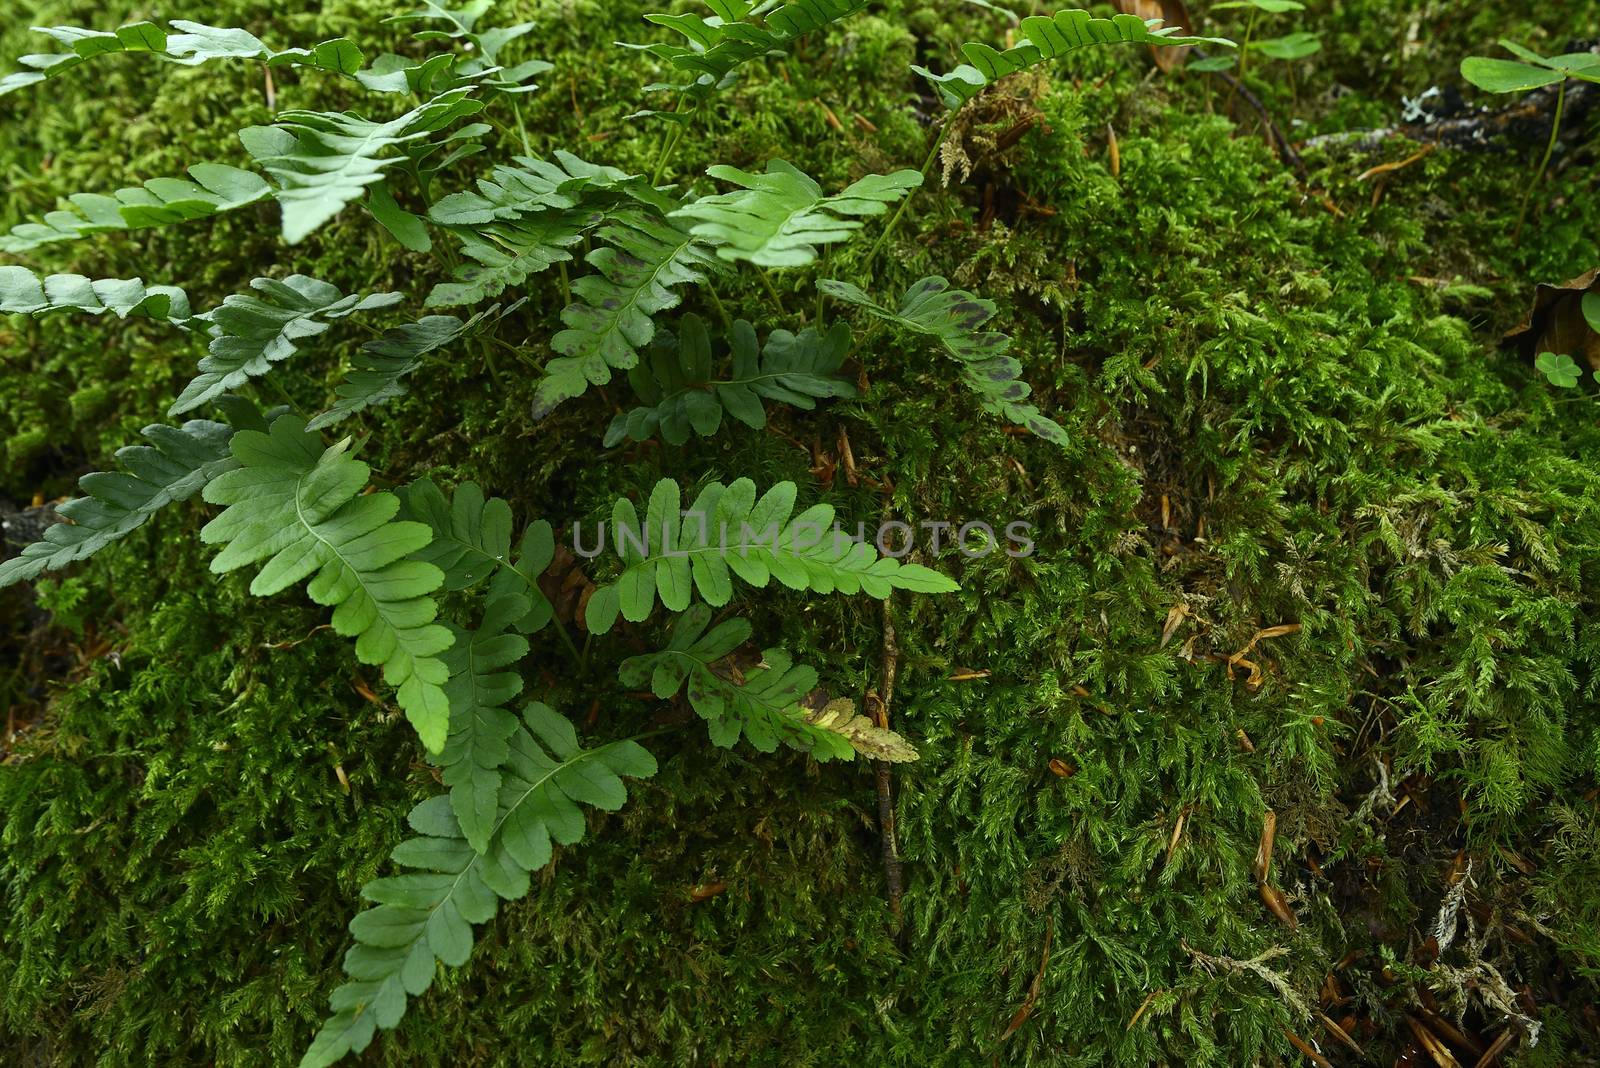 Moss and ferns in the forest, green by jalonsohu@gmail.com